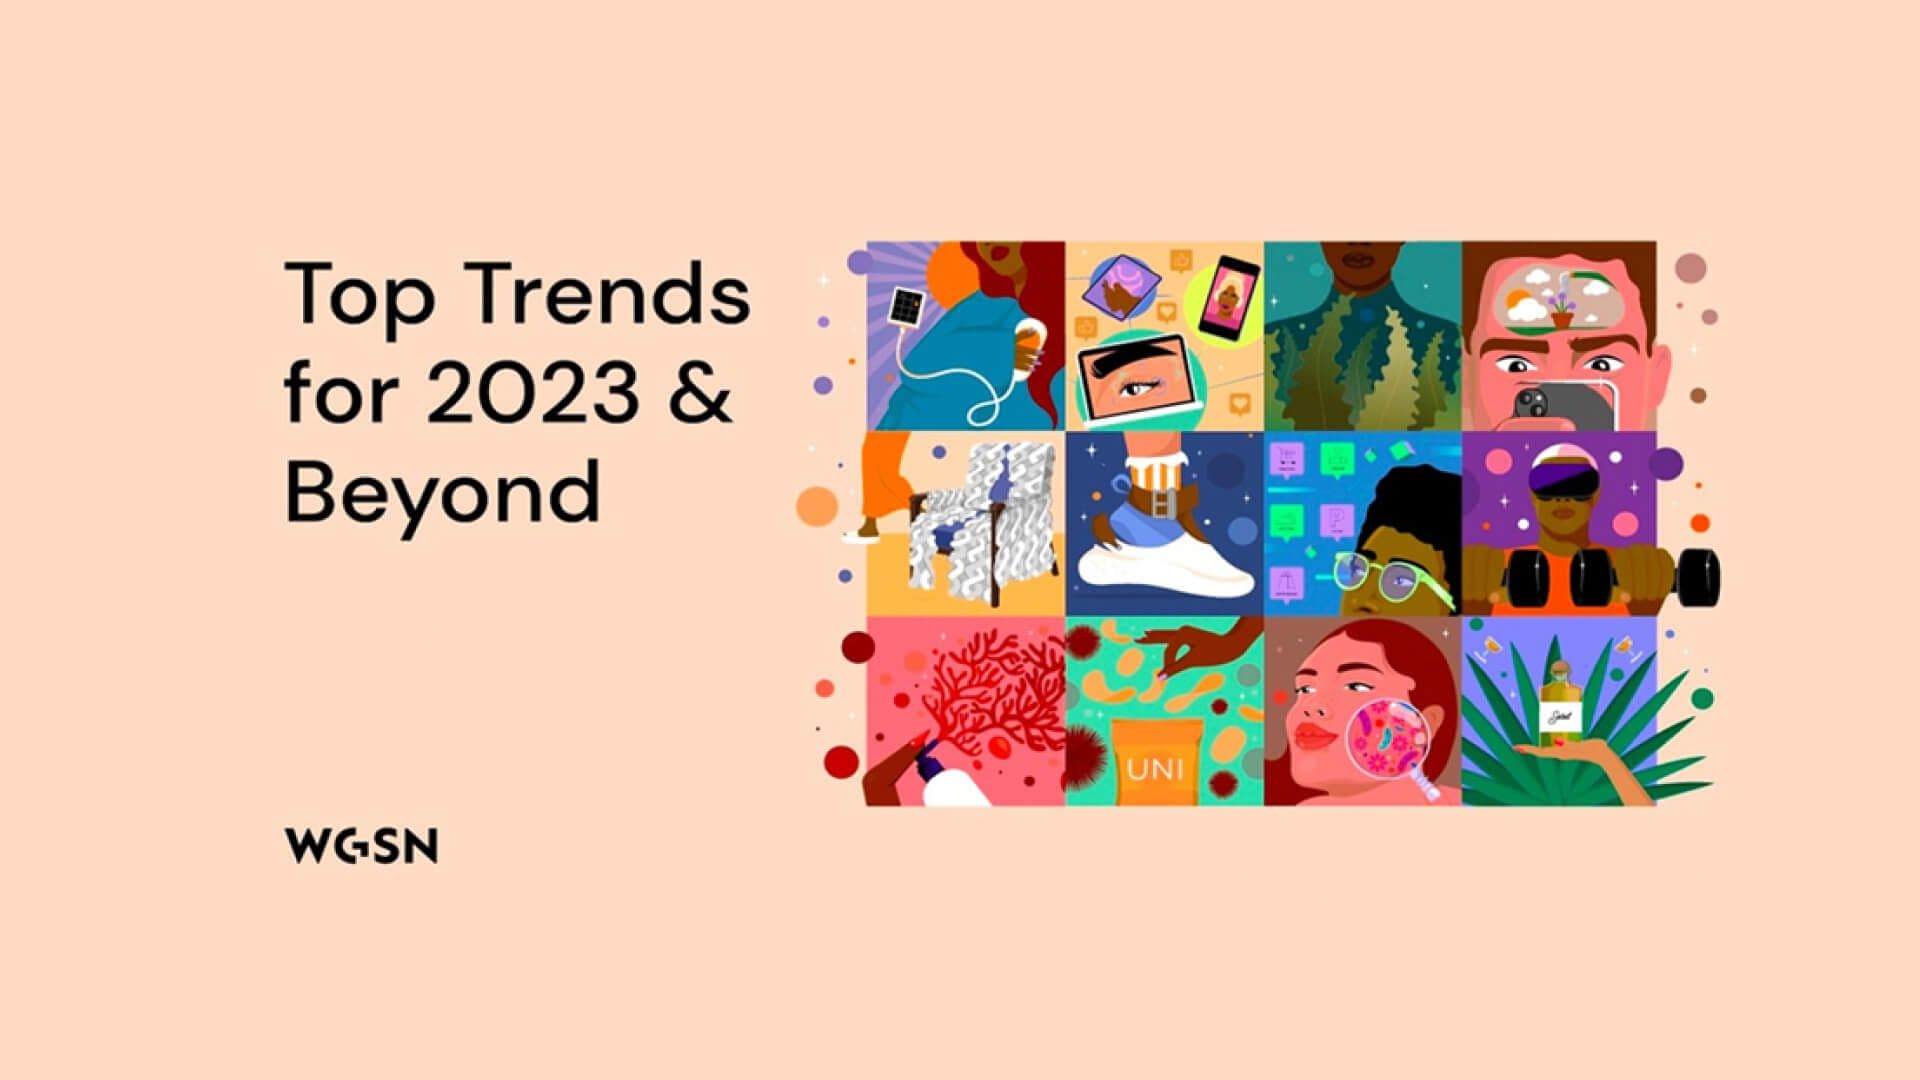 Top Trends for 2023 & Beyond